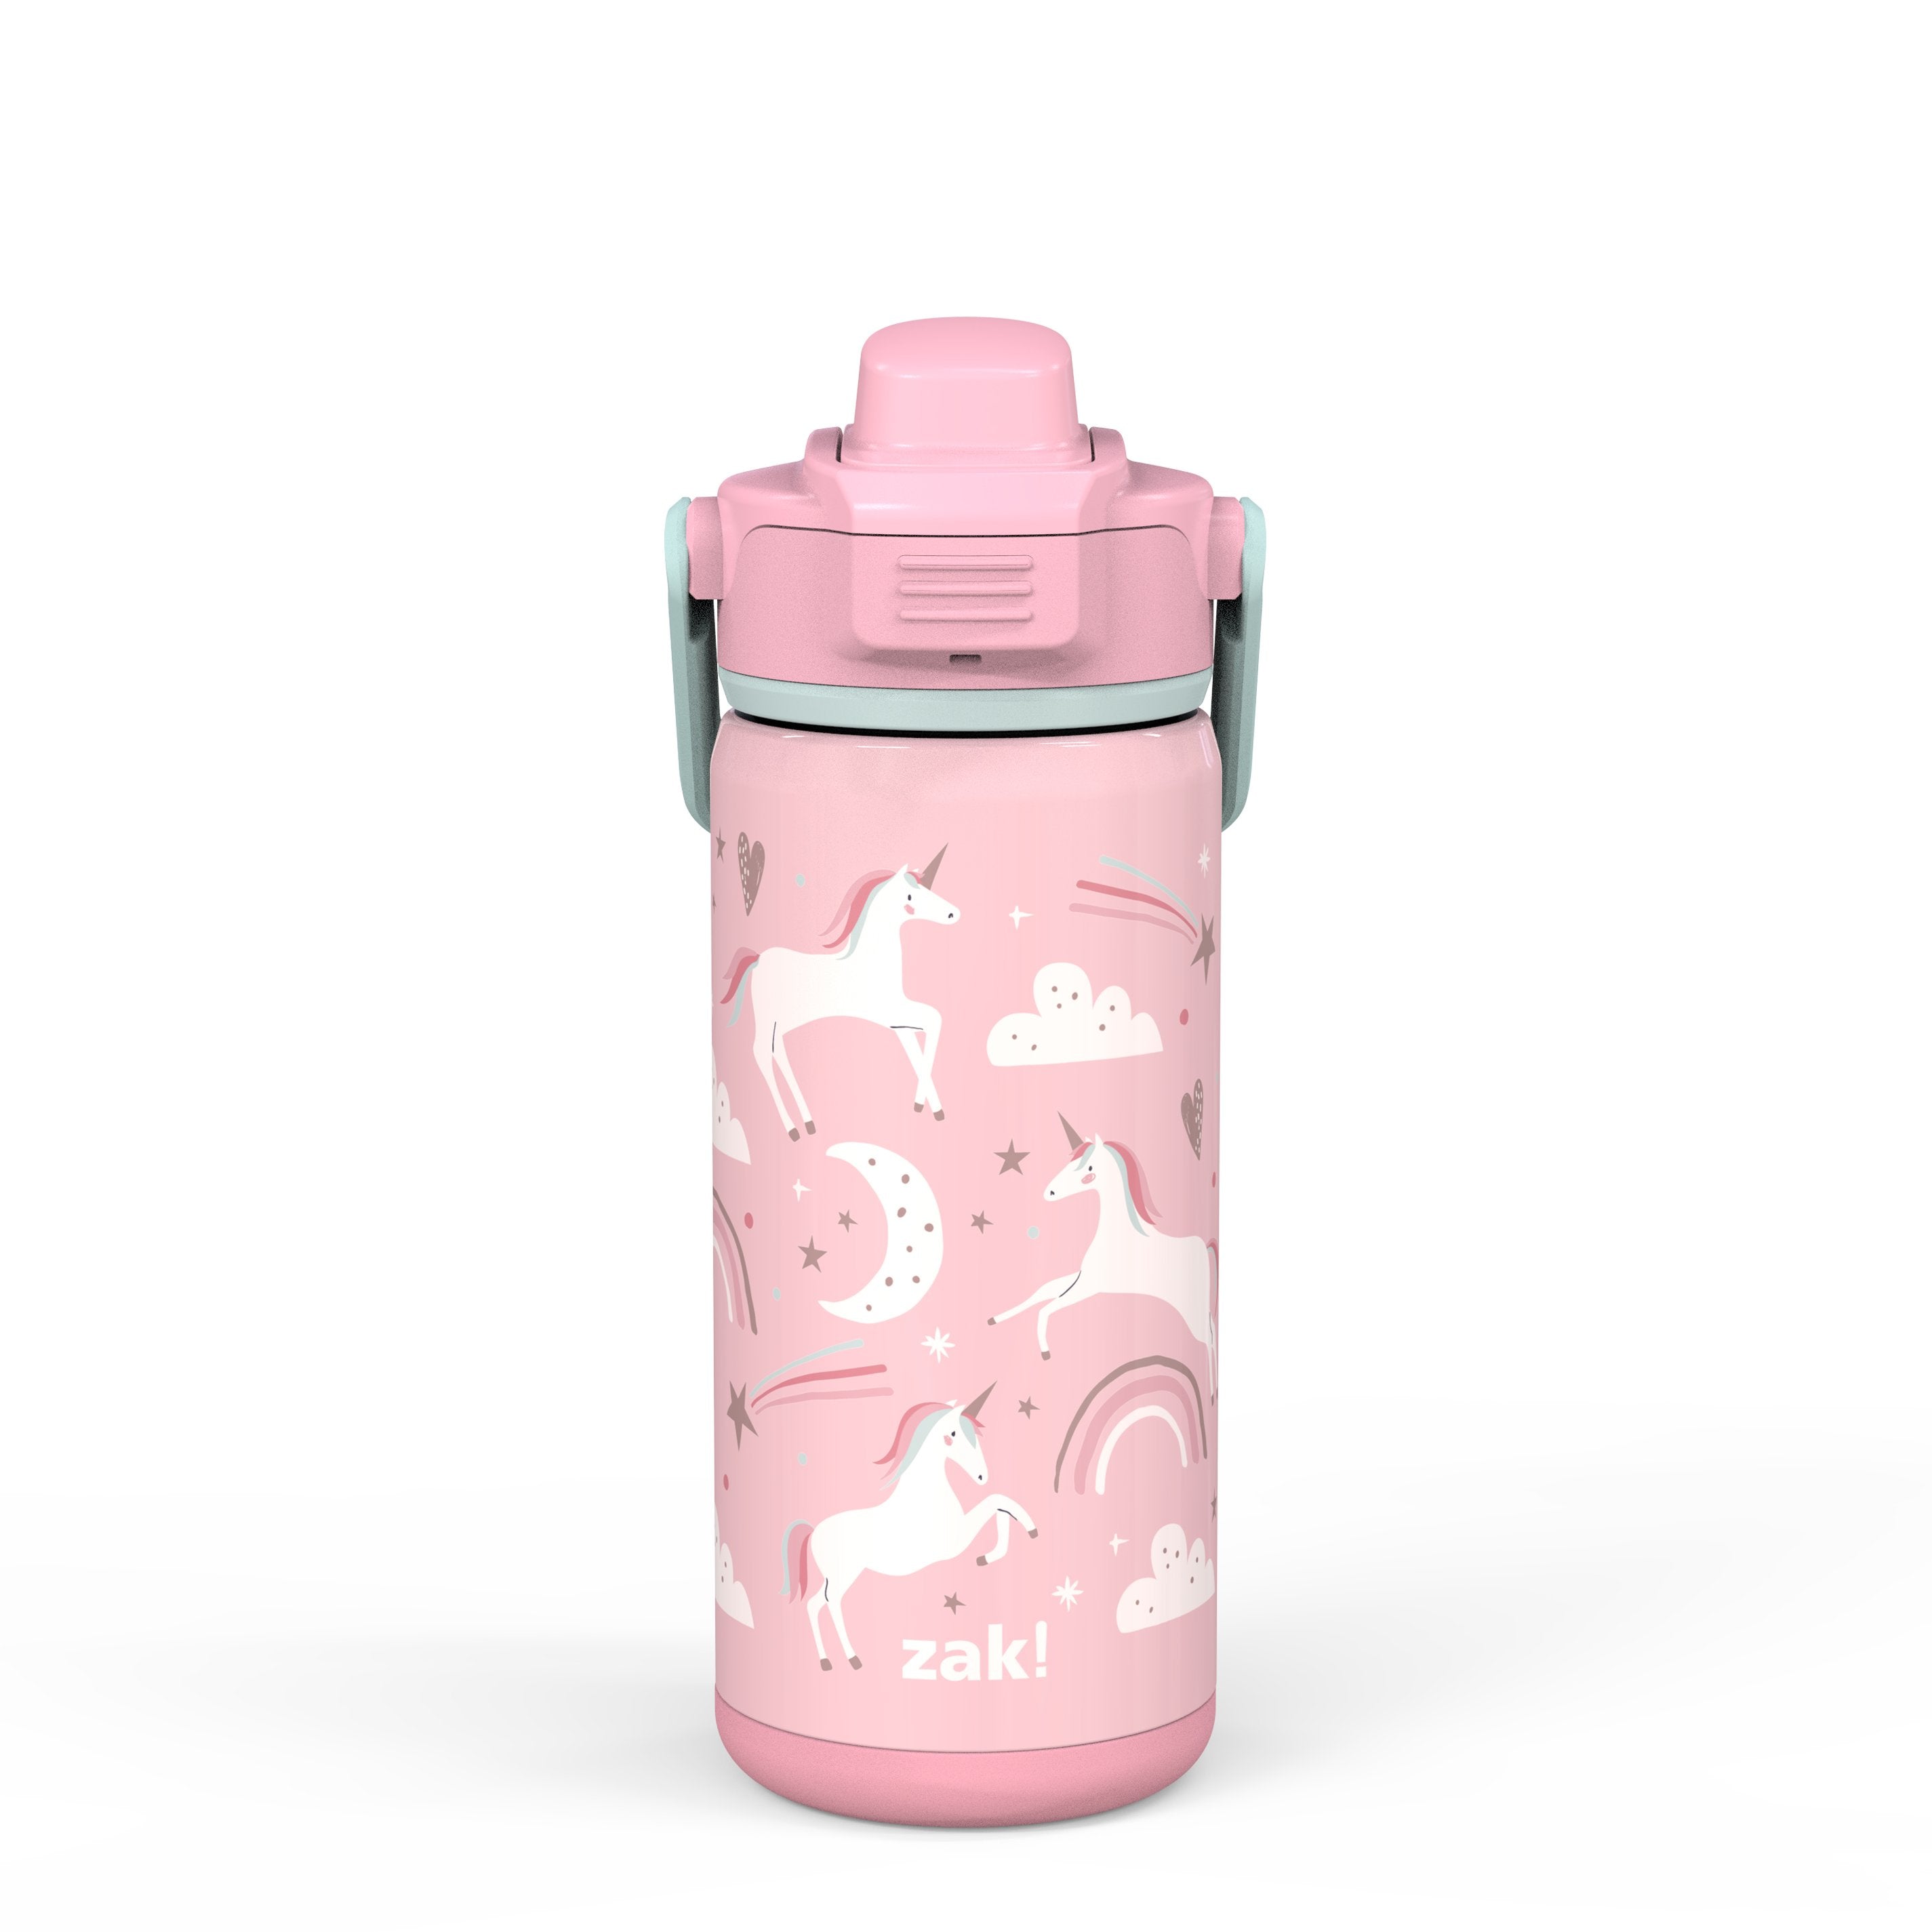 Zak Designs Unicorn 14 oz Double Wall Vacuum Insulated Thermal Kids Water  Bottle, 18/8 Stainless Steel, Flip-Up Straw Spout, Locking Spout Cover,  Durable Cup for Sports or Travel 